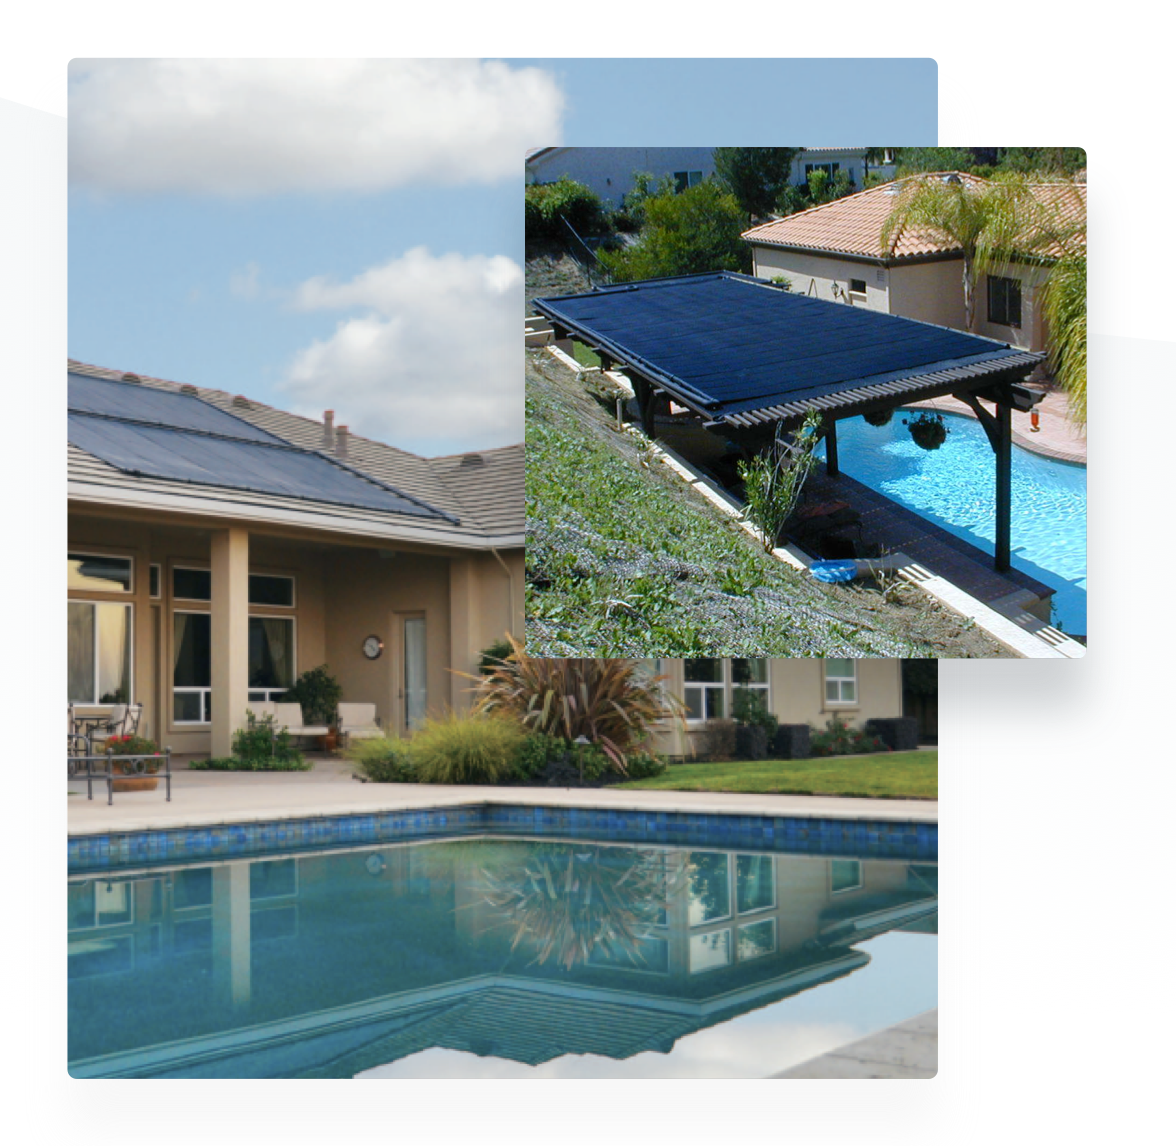 Solar Pool Heater Panels on a Roof